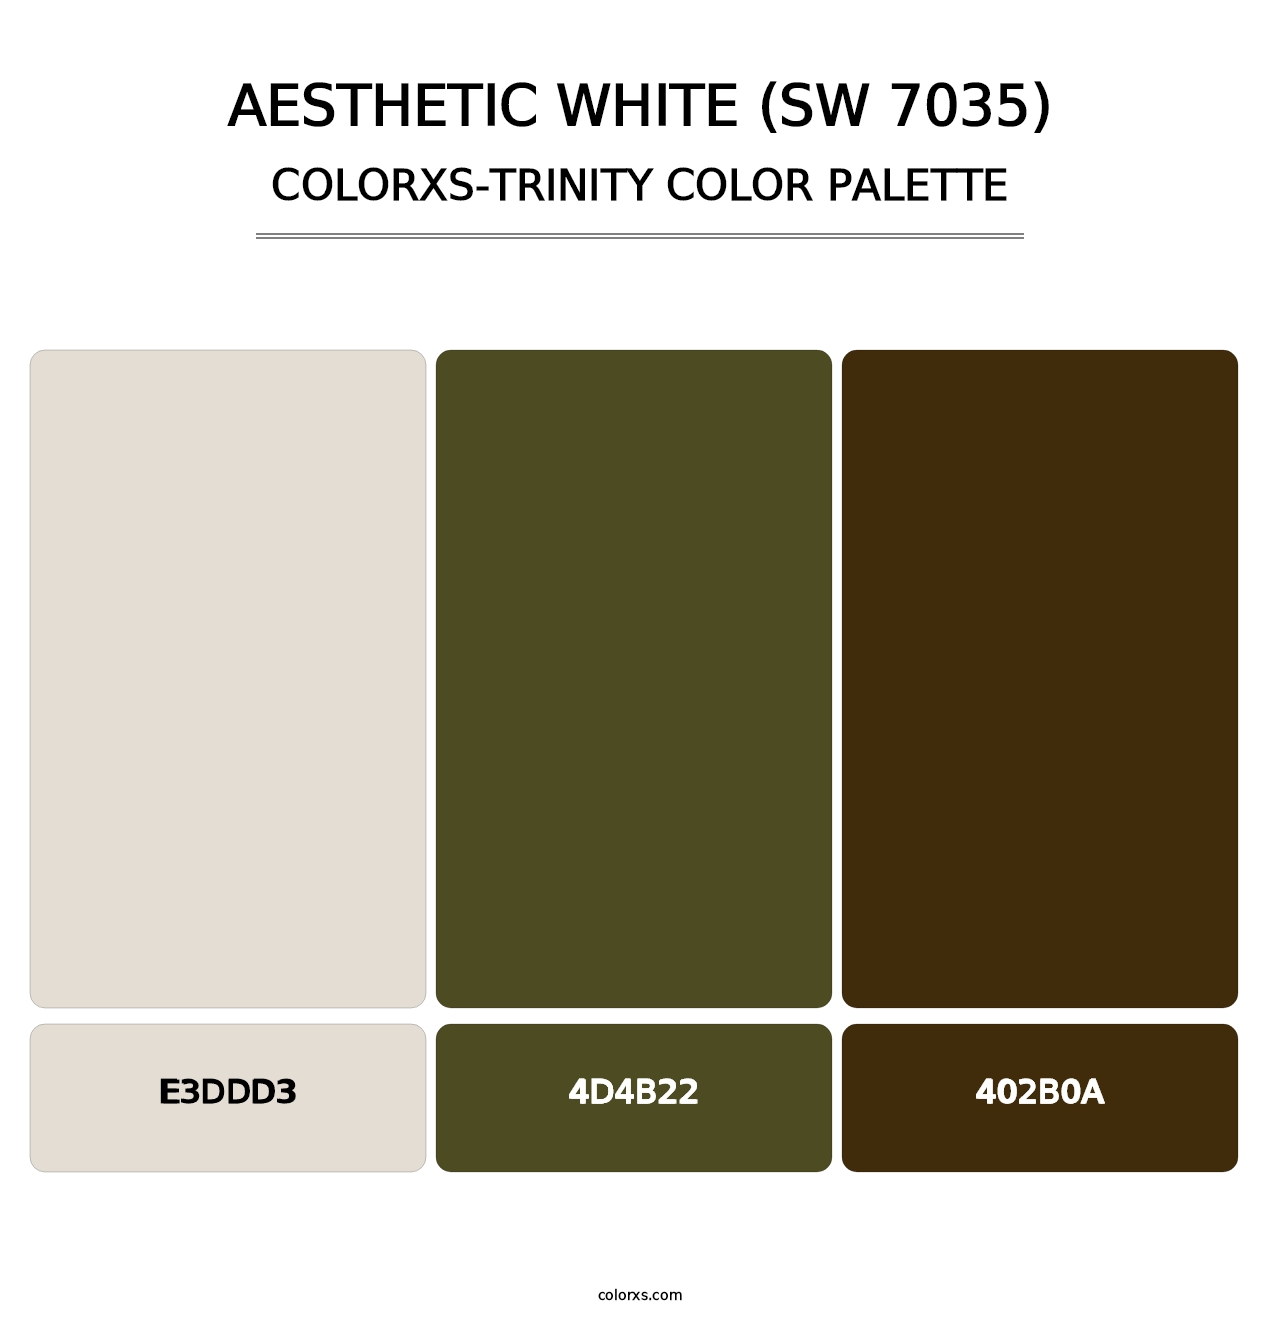 Aesthetic White (SW 7035) - Colorxs Trinity Palette